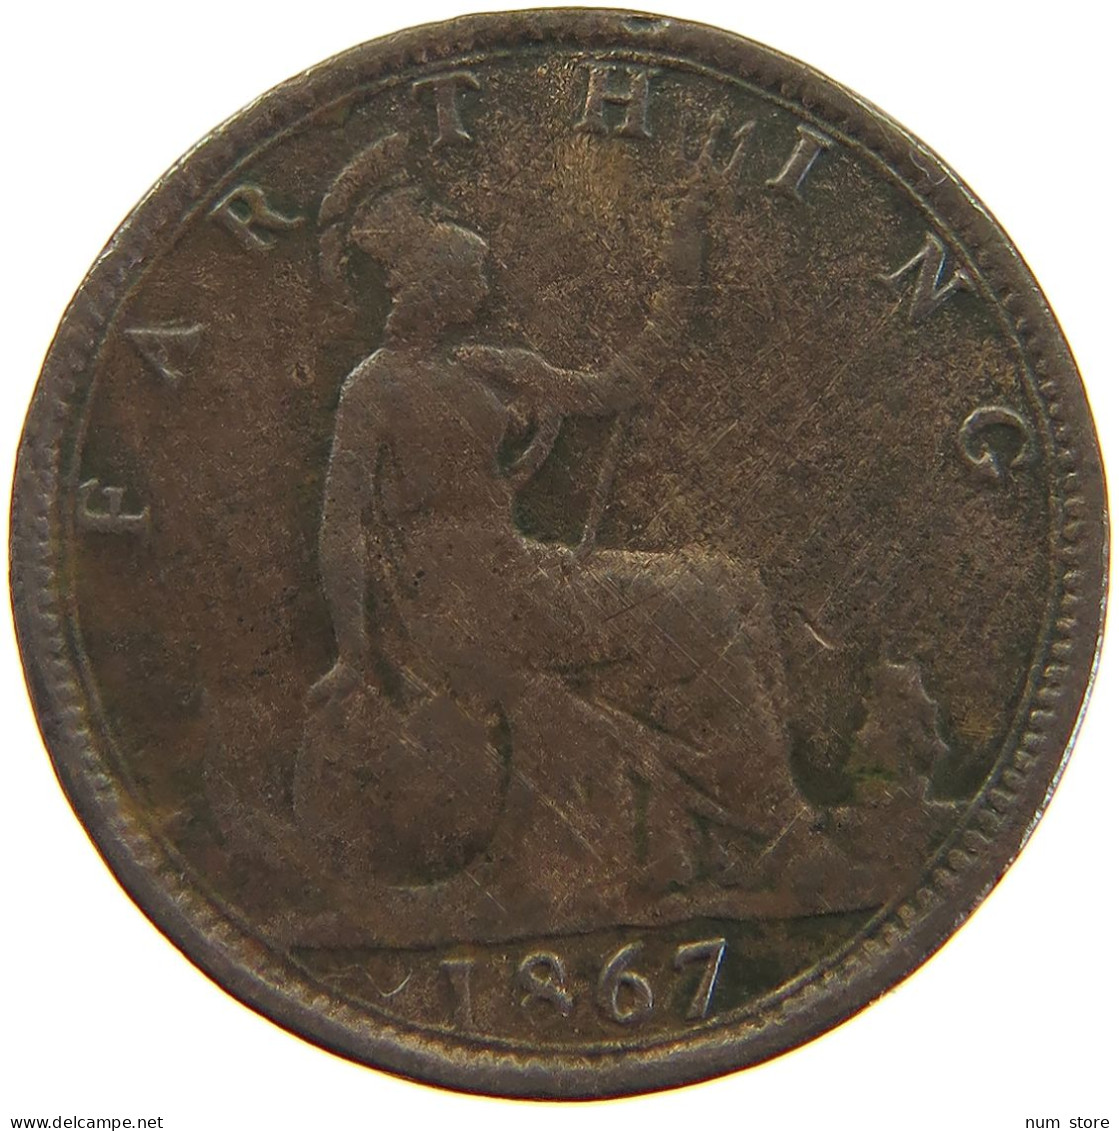 GREAT BRITAIN FARTHING 1867 Victoria 1837-1901 #a066 0799 - B. 1 Farthing